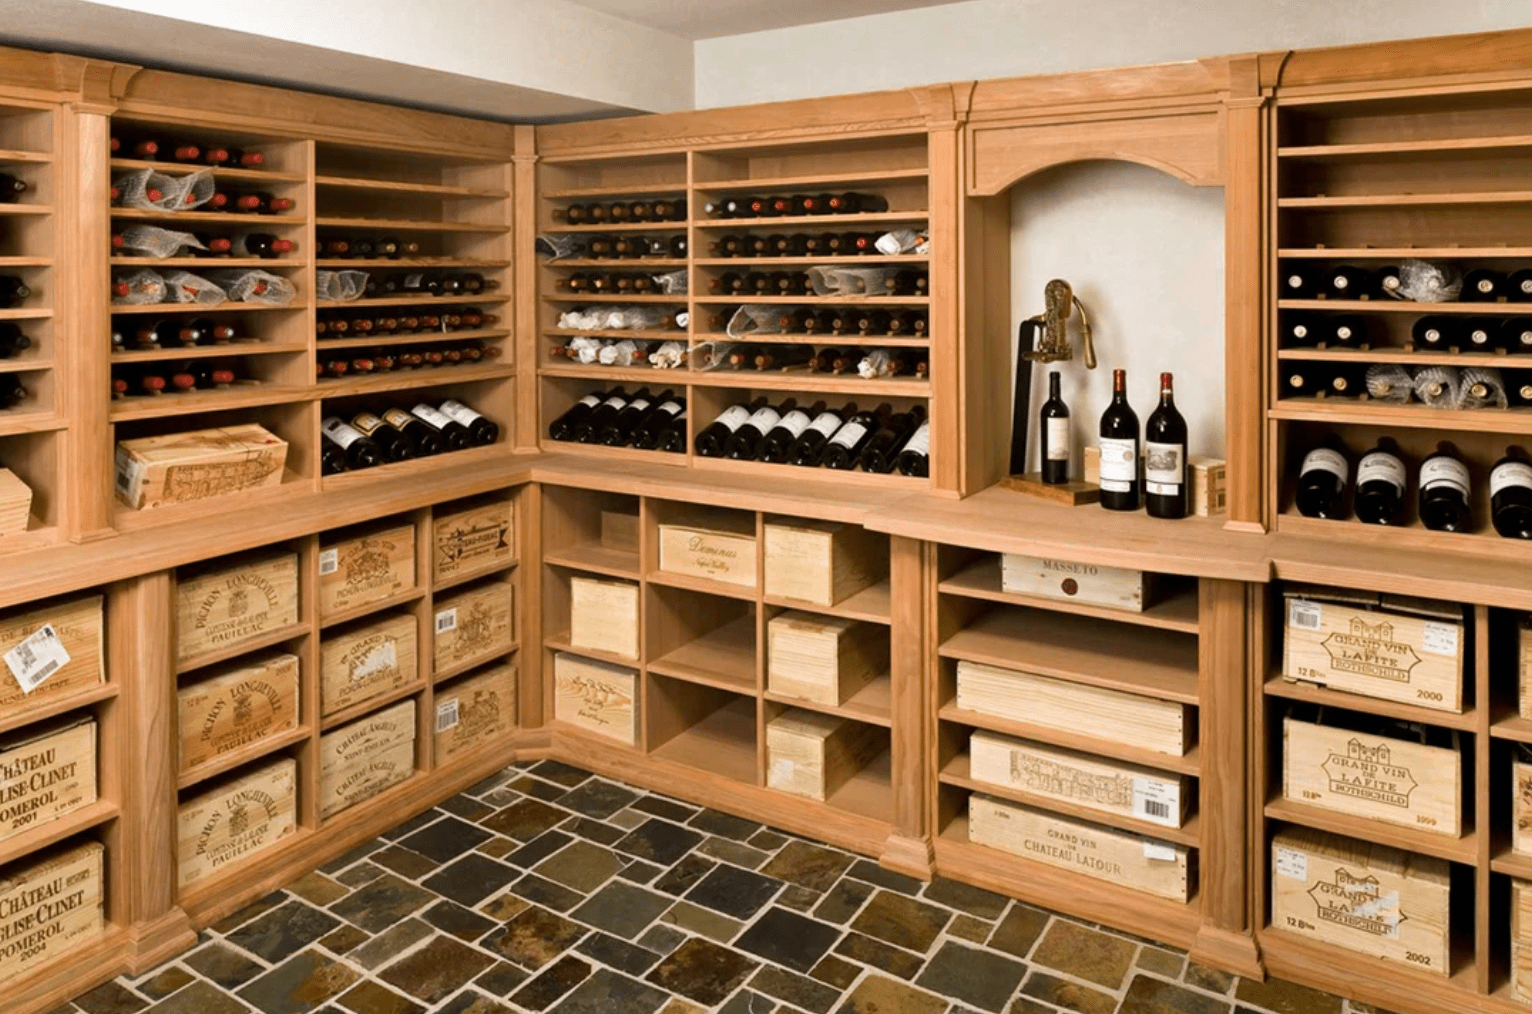 Custom wooden wine cellar stocked with many valuable vintage wines.